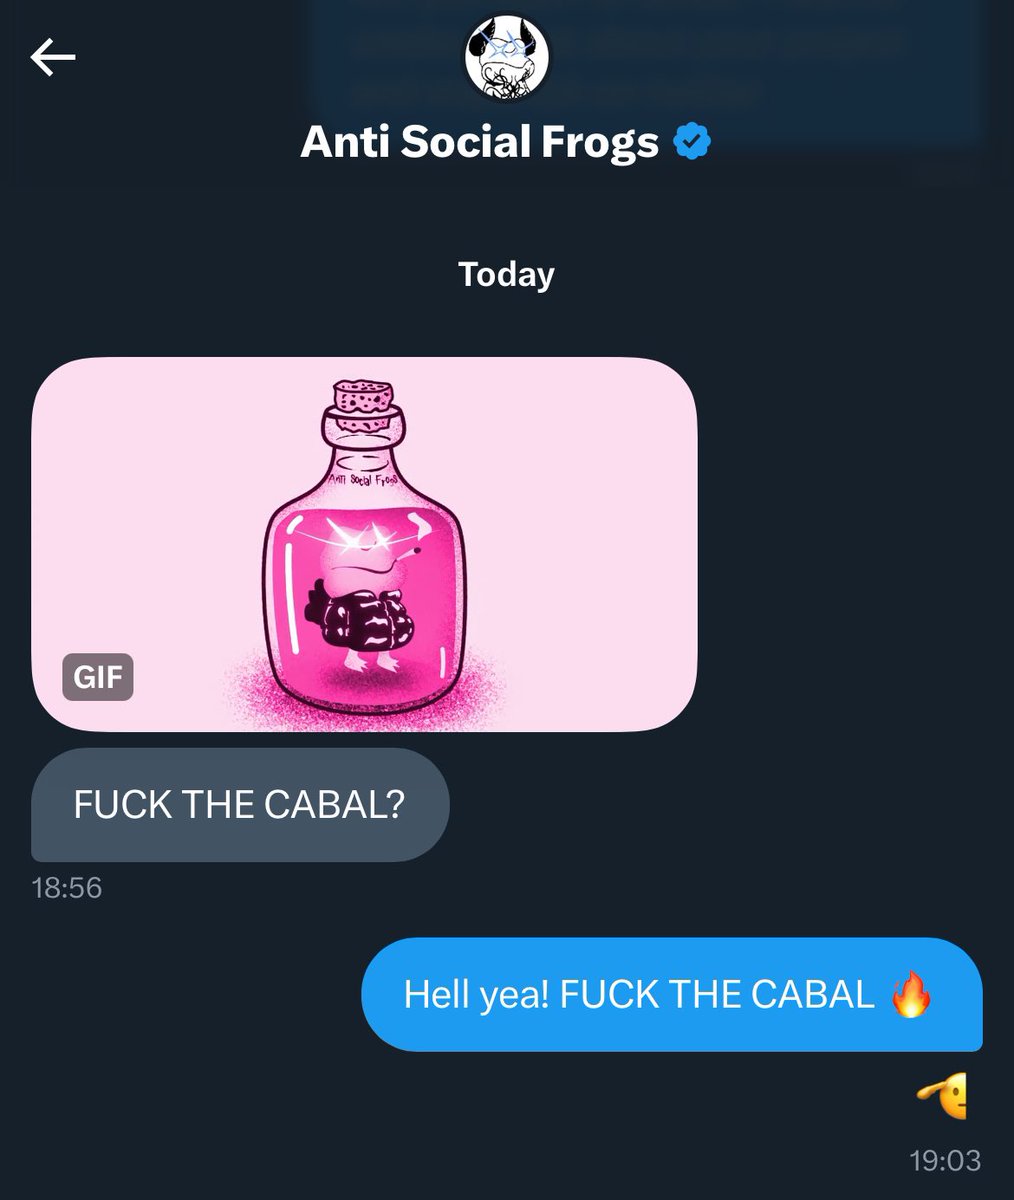 Just joined the circle 🥂 @AntiSocialFrogs FUCK THE CABAL 🌹